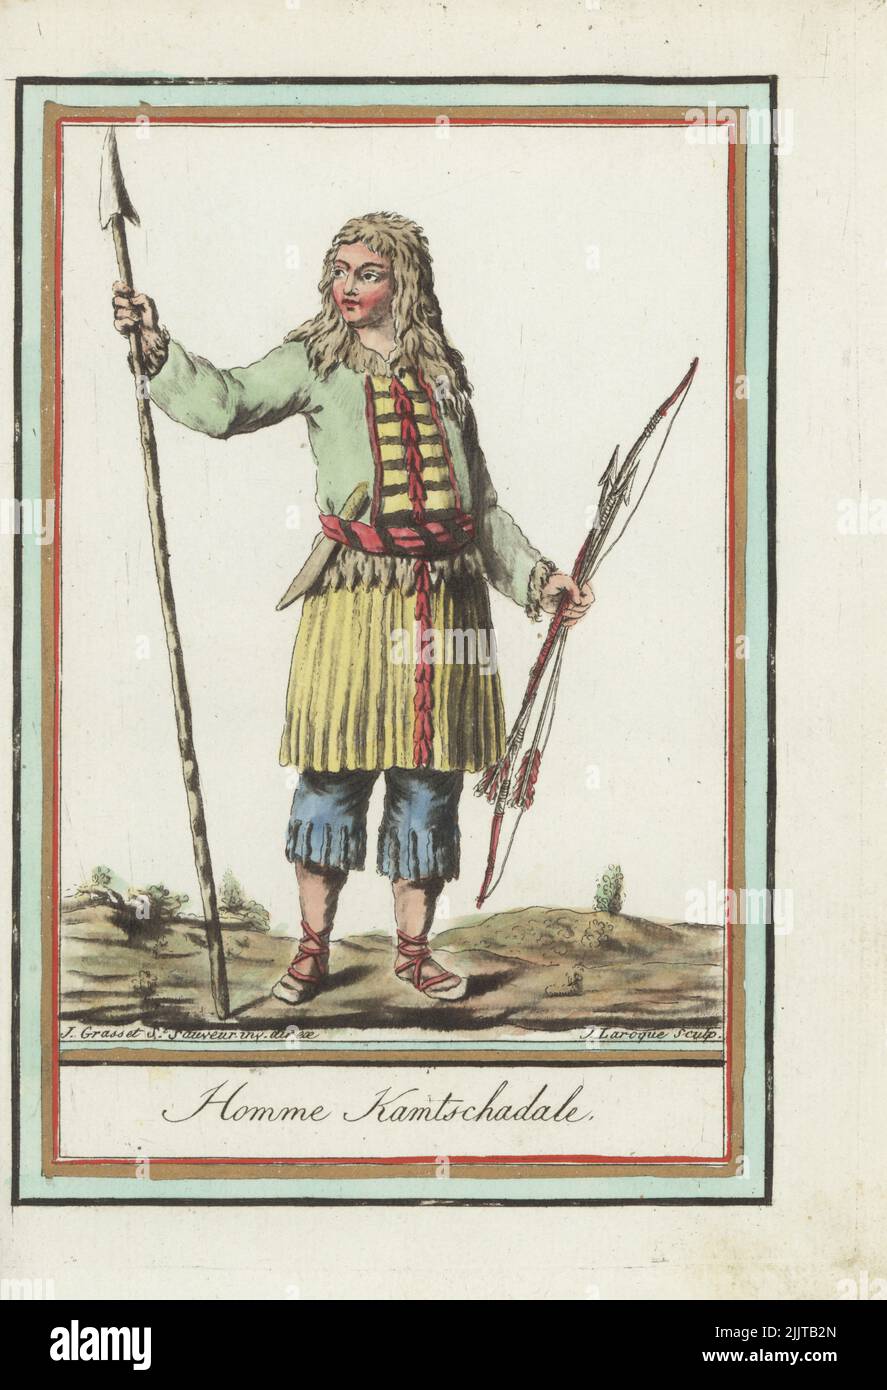 Itelmen or Kamchadal man. In fur-lined jerkin, skirt, trousers, boots, armed with spear, low and arrow, dagger. Aboriginal people of Kamchatka, decimated by Cossacks and smallpox in the 18th century.  Homme Kamtschadale. Handcoloured copperplate engraving by J. Laroque after a design by Jacques Grasset de Saint-Sauveur from his Encyclopedie des voyages, Encyclopedia of Voyages, Bordeaux, France, 1792. Stock Photo